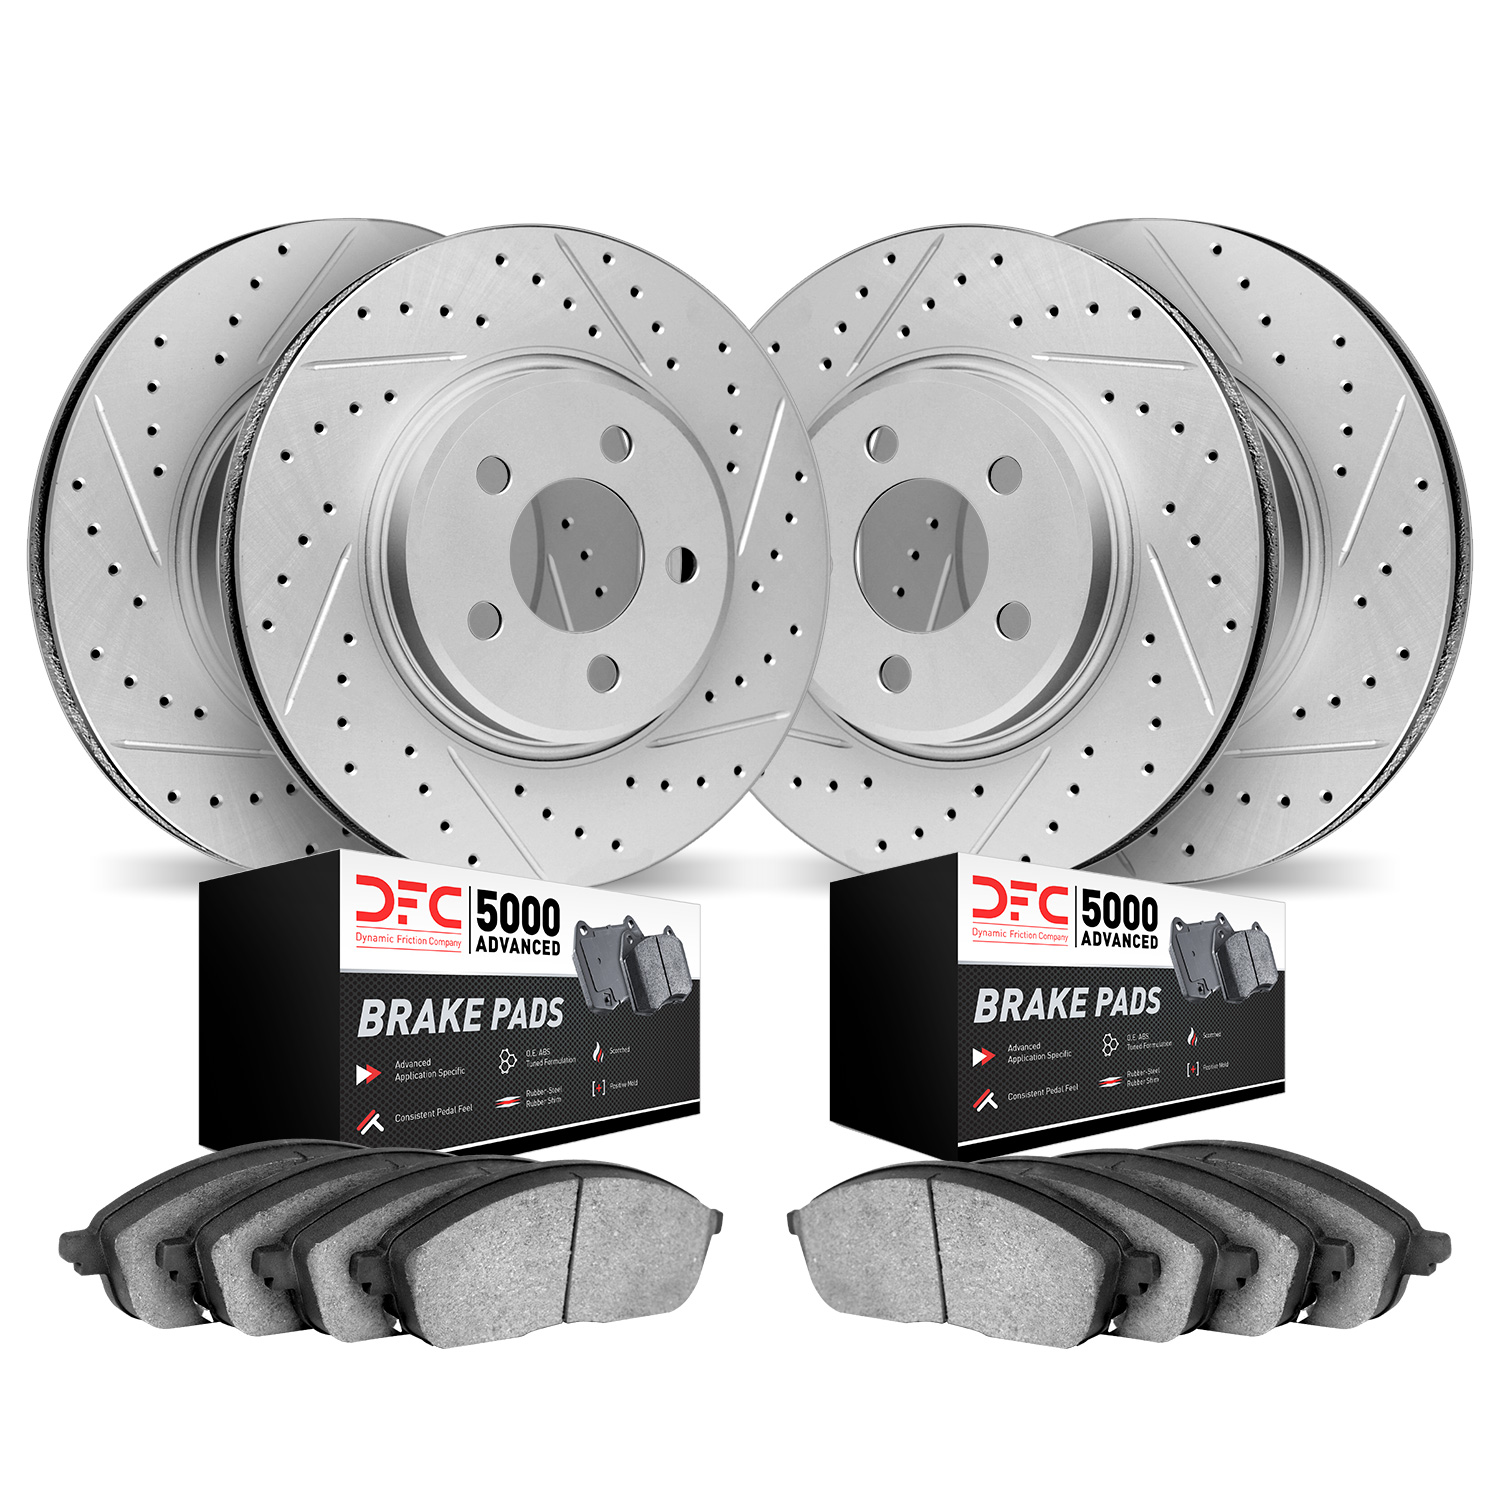 2504-31051 Geoperformance Drilled/Slotted Rotors w/5000 Advanced Brake Pads Kit, 2007-2010 BMW, Position: Front and Rear